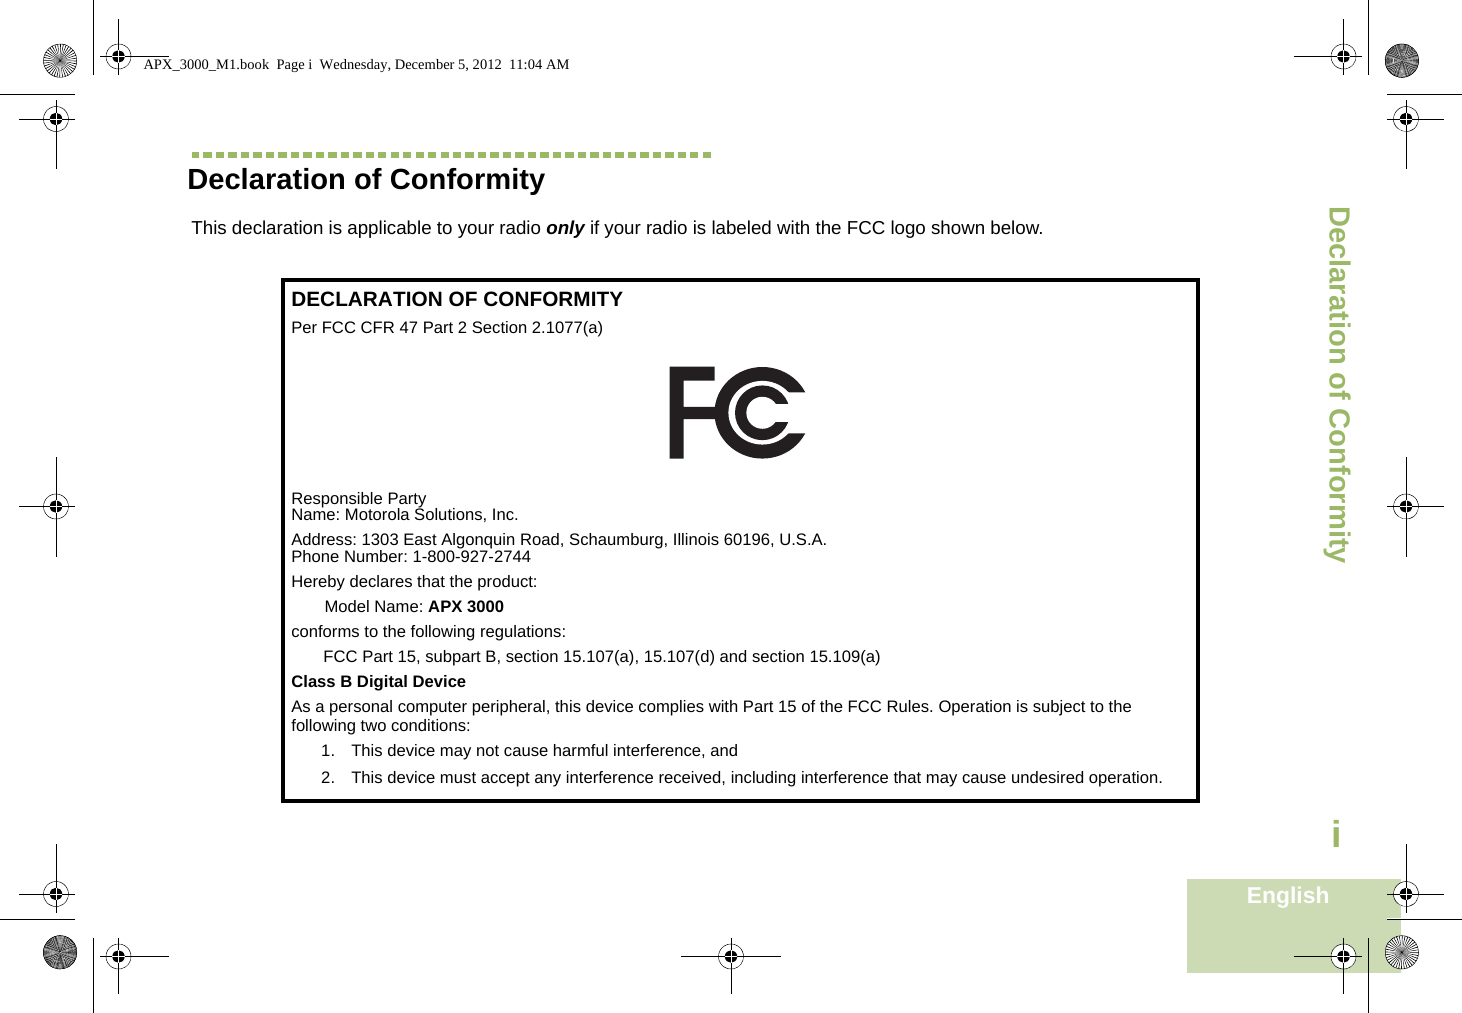 Declaration of ConformityEnglishiDeclaration of Conformity  This declaration is applicable to your radio only if your radio is labeled with the FCC logo shown below.DECLARATION OF CONFORMITYPer FCC CFR 47 Part 2 Section 2.1077(a)Responsible Party Name: Motorola Solutions, Inc.Address: 1303 East Algonquin Road, Schaumburg, Illinois 60196, U.S.A.Phone Number: 1-800-927-2744Hereby declares that the product:Model Name: APX 3000conforms to the following regulations:FCC Part 15, subpart B, section 15.107(a), 15.107(d) and section 15.109(a)Class B Digital DeviceAs a personal computer peripheral, this device complies with Part 15 of the FCC Rules. Operation is subject to the following two conditions:1. This device may not cause harmful interference, and 2. This device must accept any interference received, including interference that may cause undesired operation.APX_3000_M1.book  Page i  Wednesday, December 5, 2012  11:04 AM